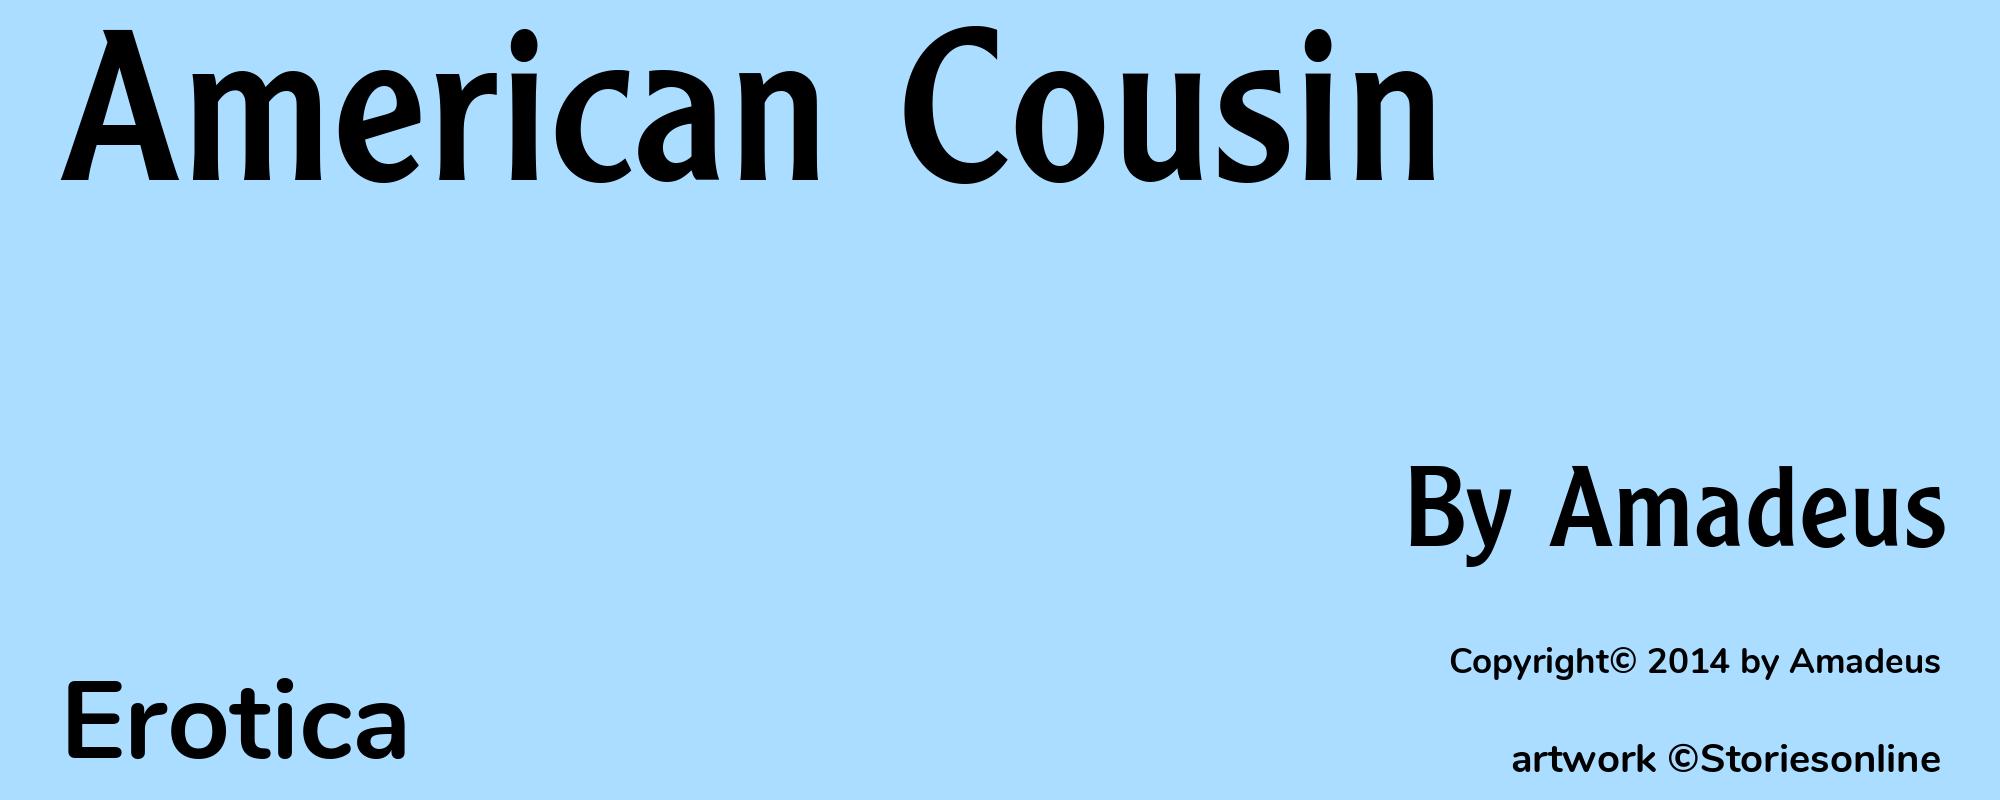 American Cousin - Cover